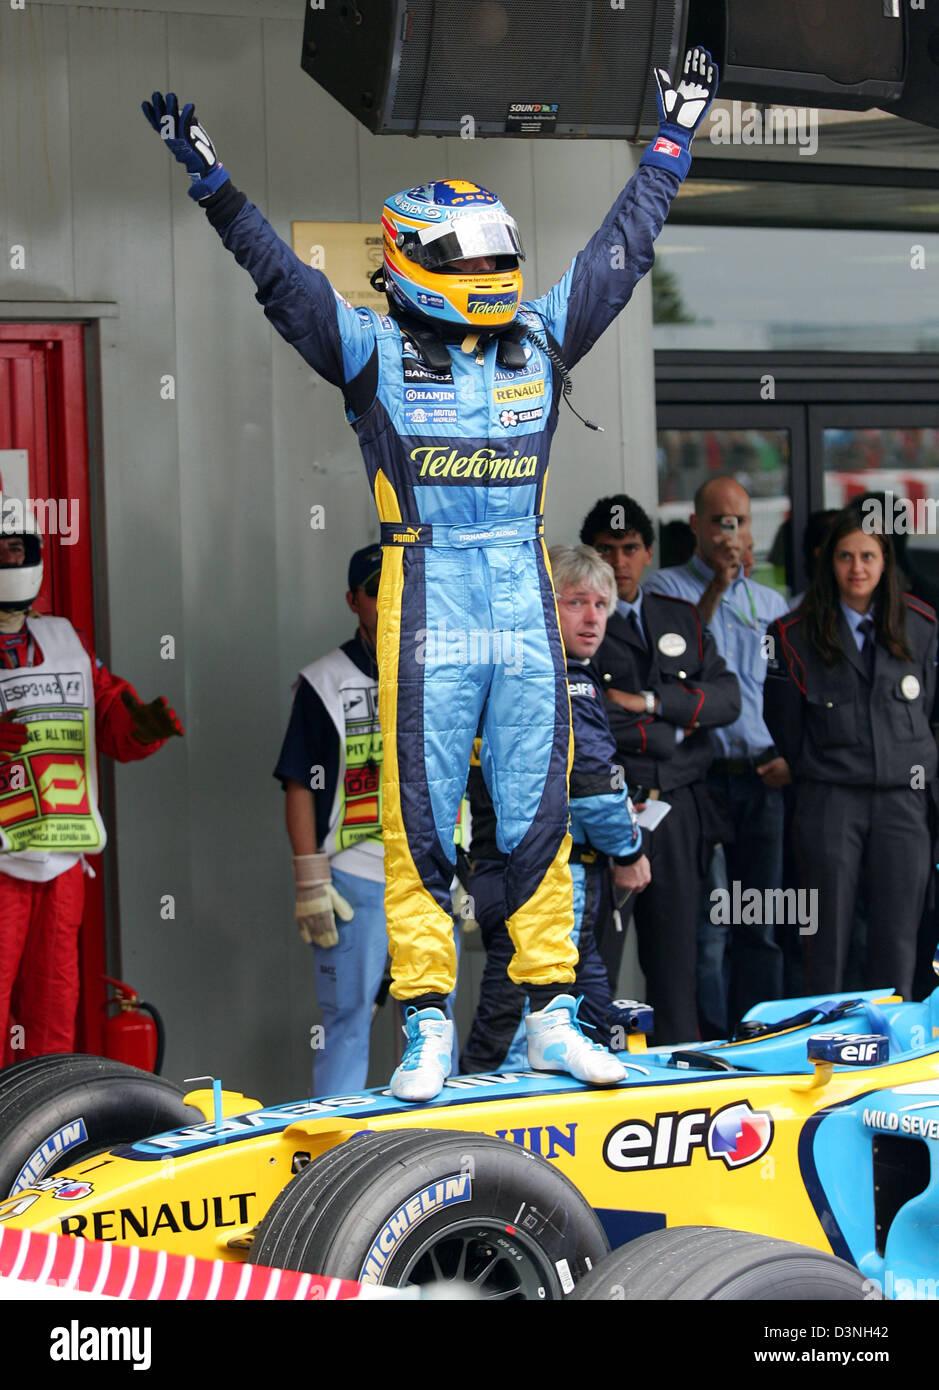 Spanish Formula One pilot Fernando Alonso of Renault F1 team cheers after he claimed Pole Position in the Qualifying session to the 2006 FORMULA 1 Grand Prix of Spain at the race track Circuit de Catalunya in Montmelo near Barcelona, Spain, Saturday, 13 May 2006. The 2006 FORMULA 1 Grand Prix of Spain takes place on Sunday, 14 May. Photo: Gero Breloer Stock Photo